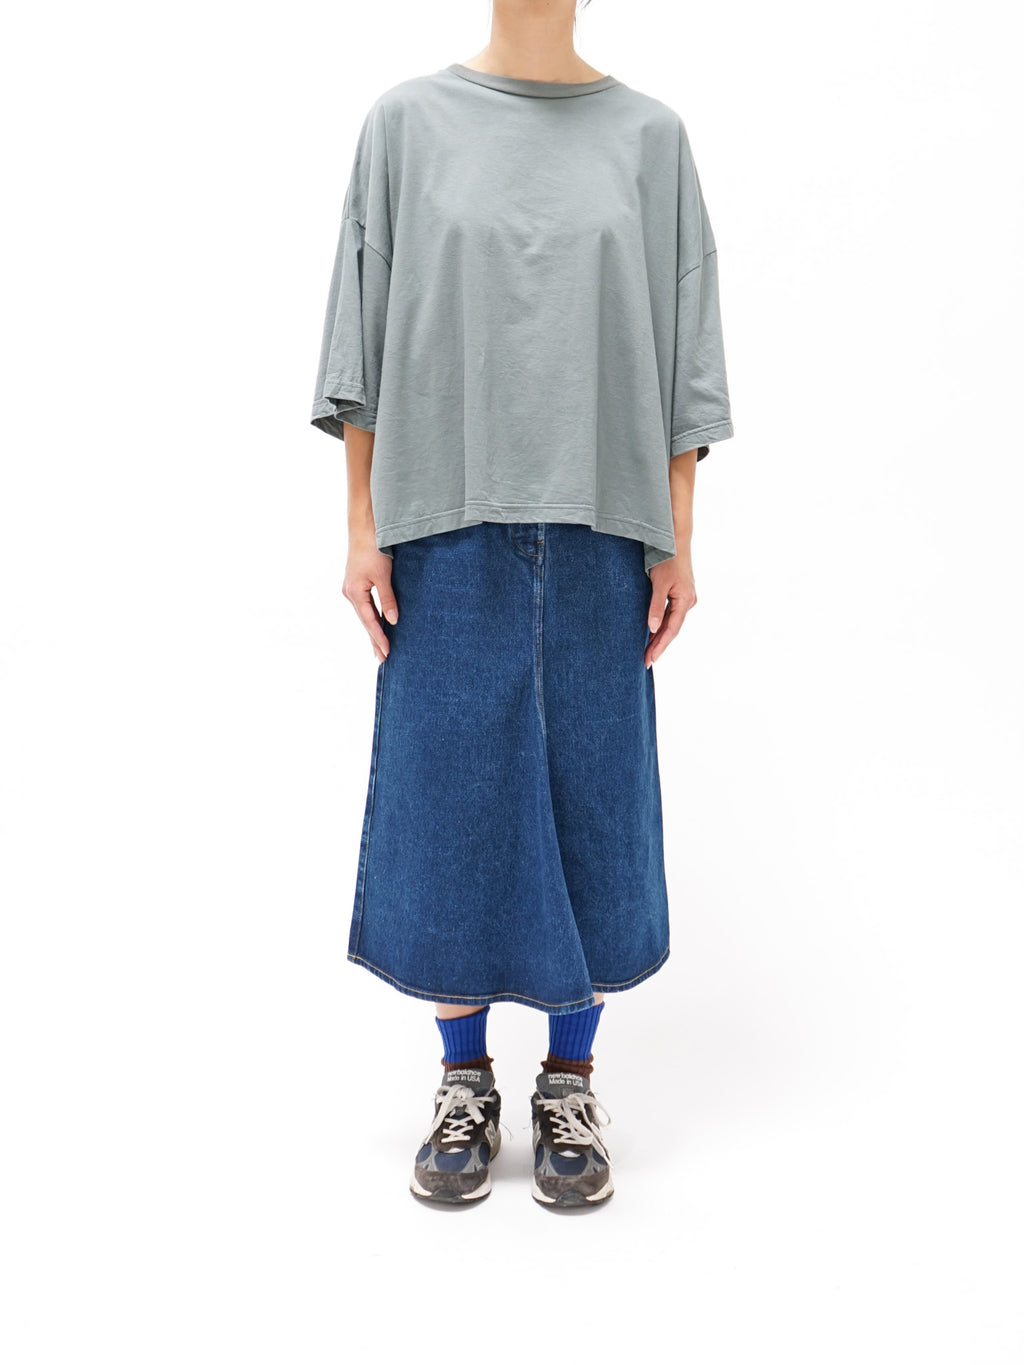 Namu Shop - ICHI Relaxed S/S Pullover - Green